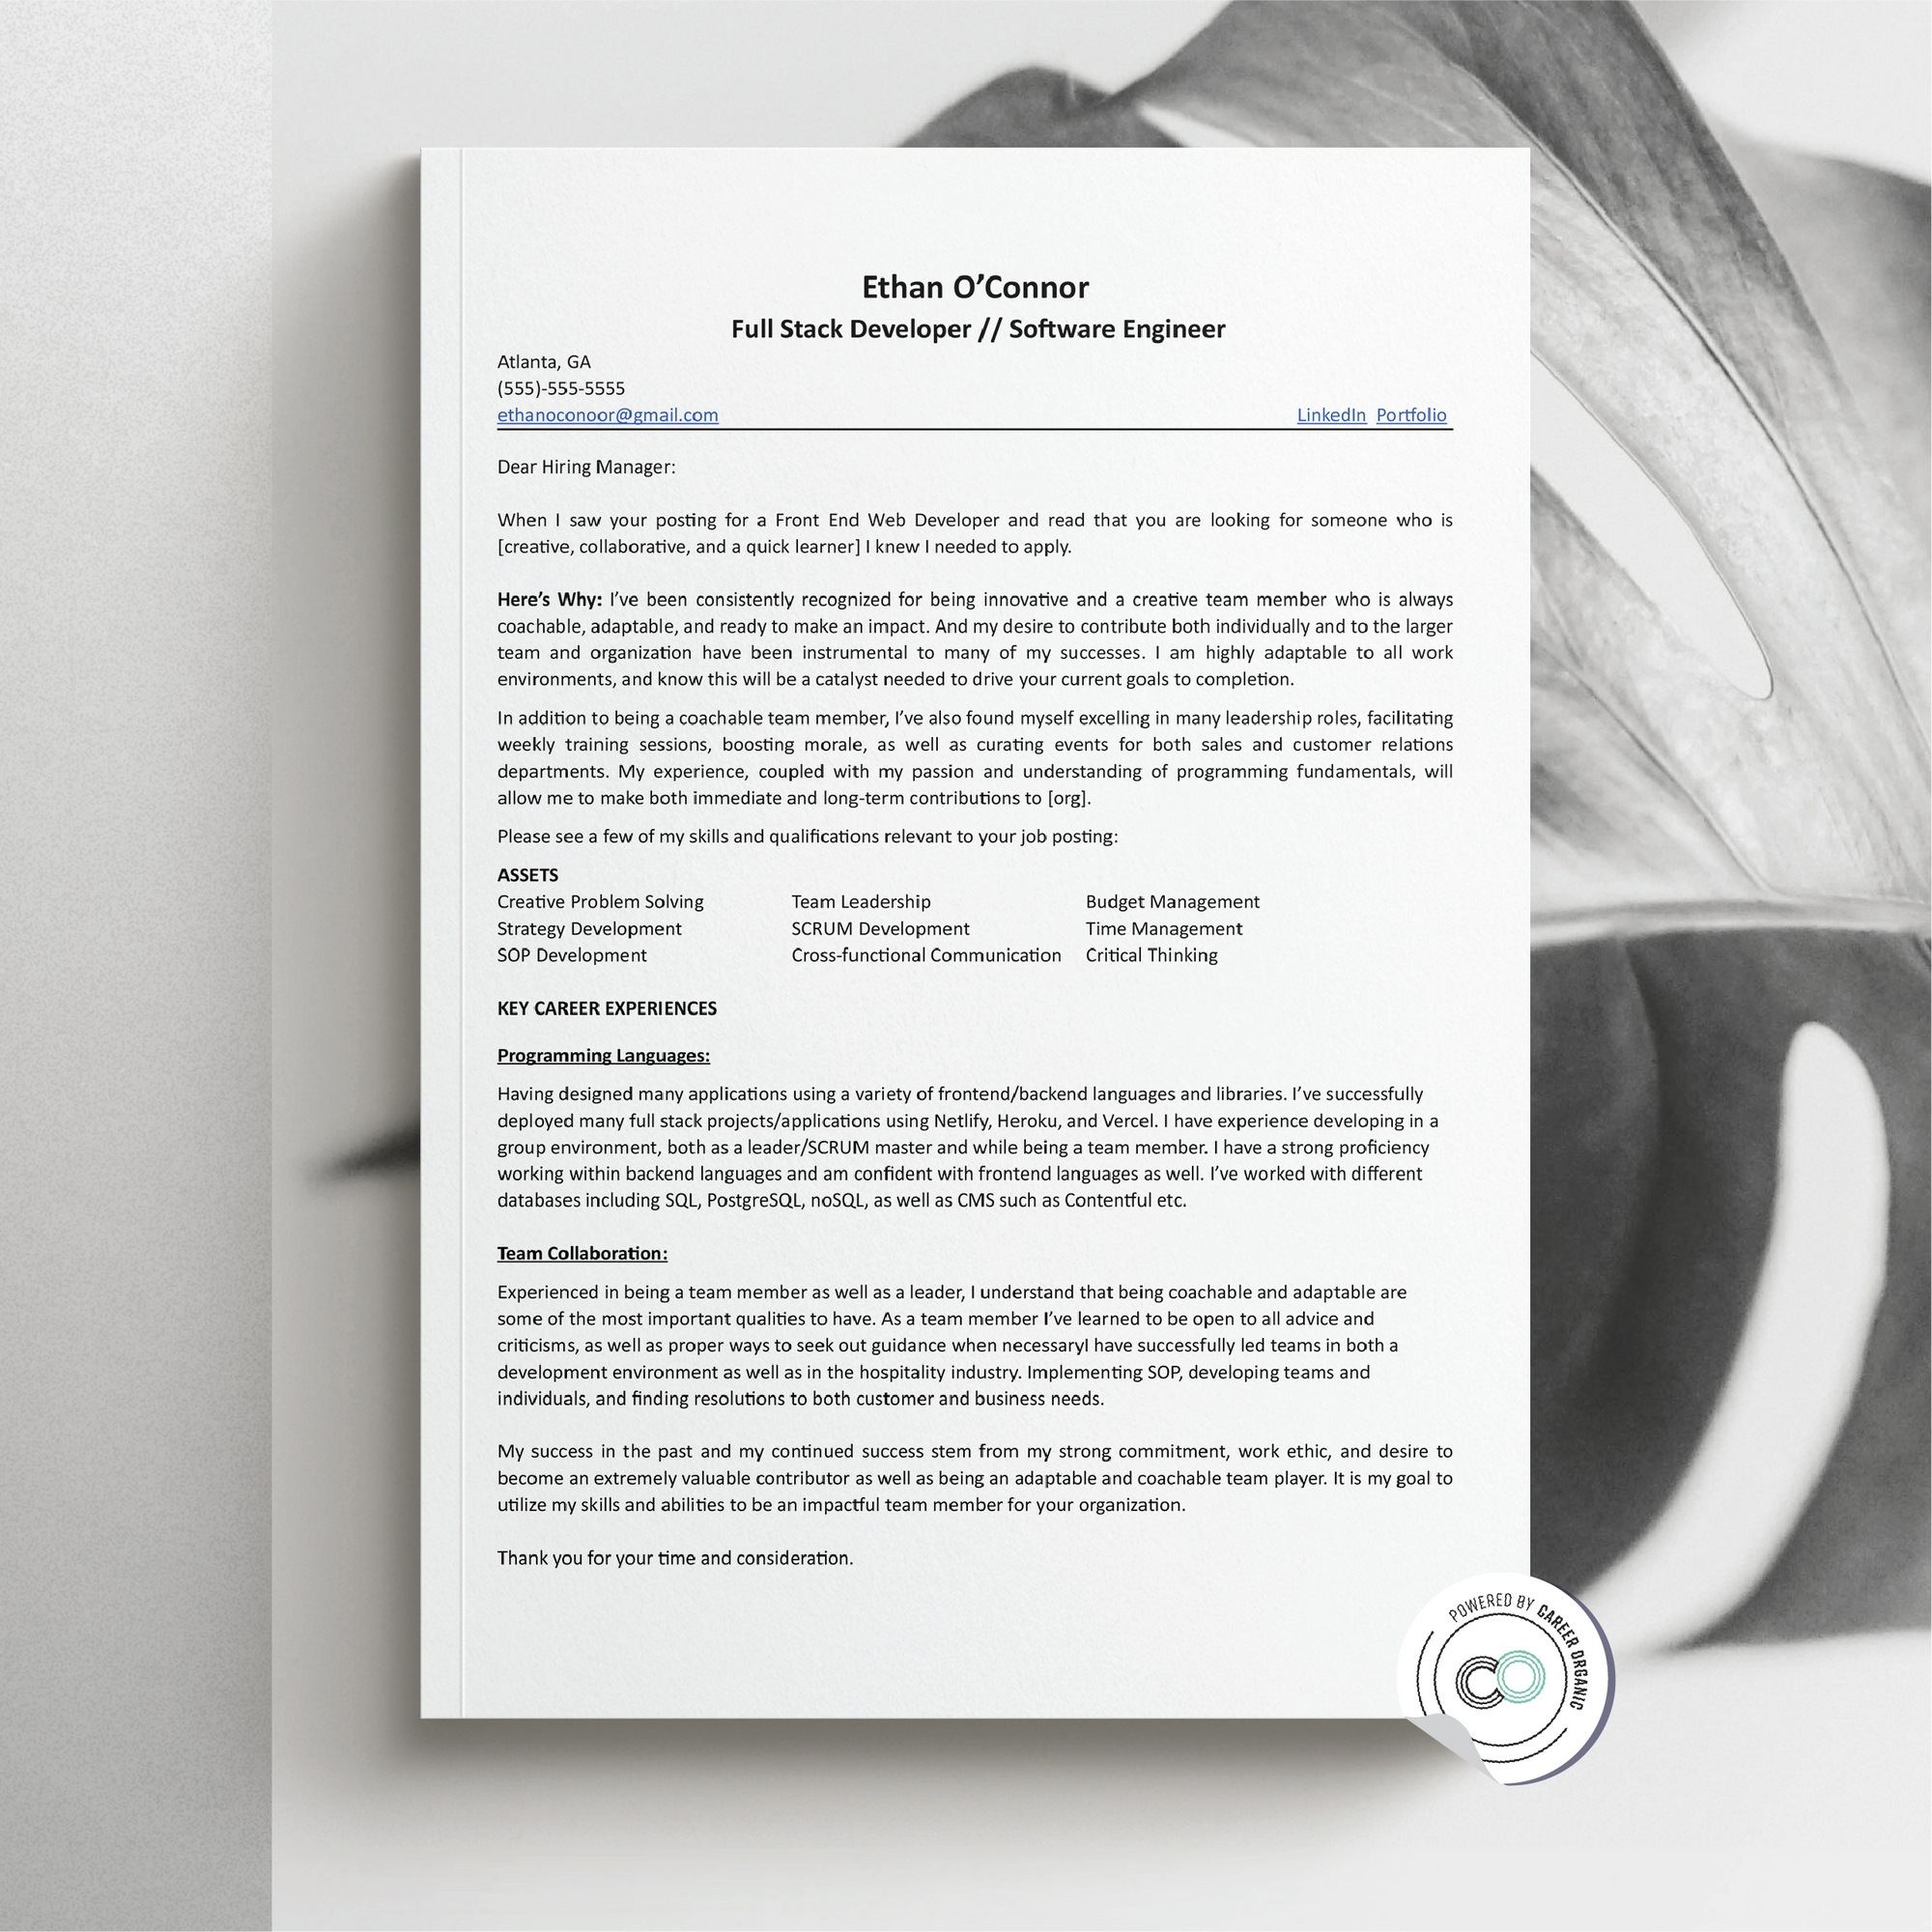 Career Organic Sample Cover letter, showing a detailed description of skill